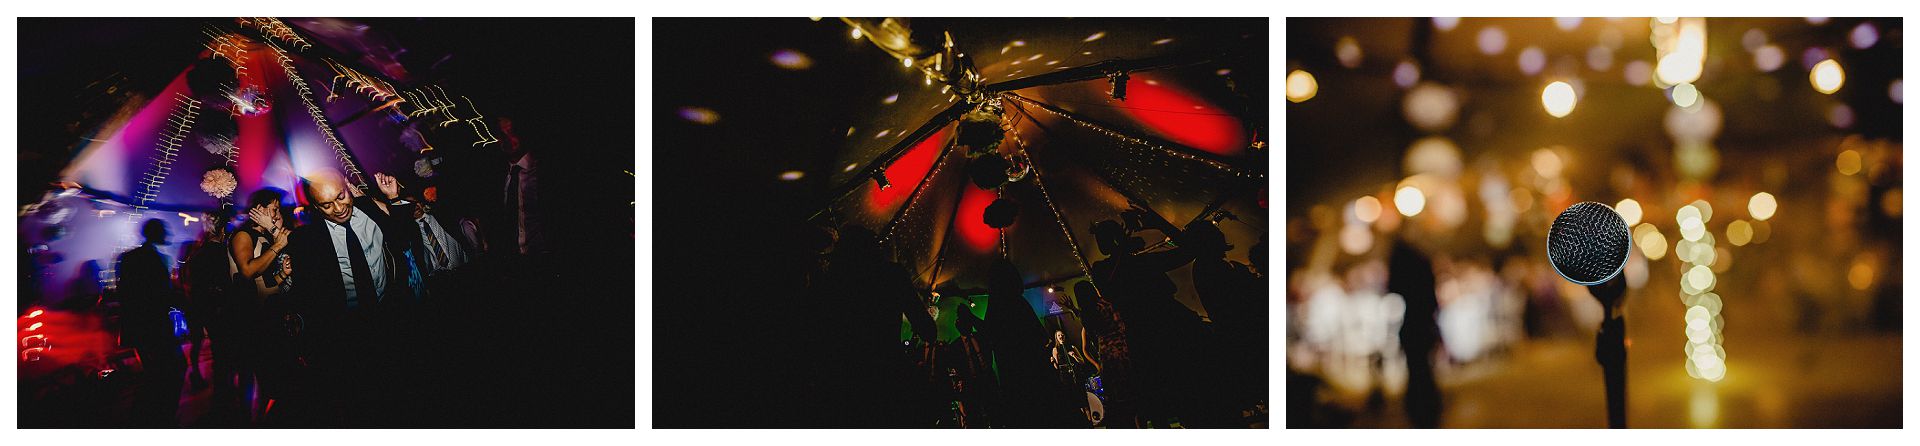 dancing in the tipi photographs 